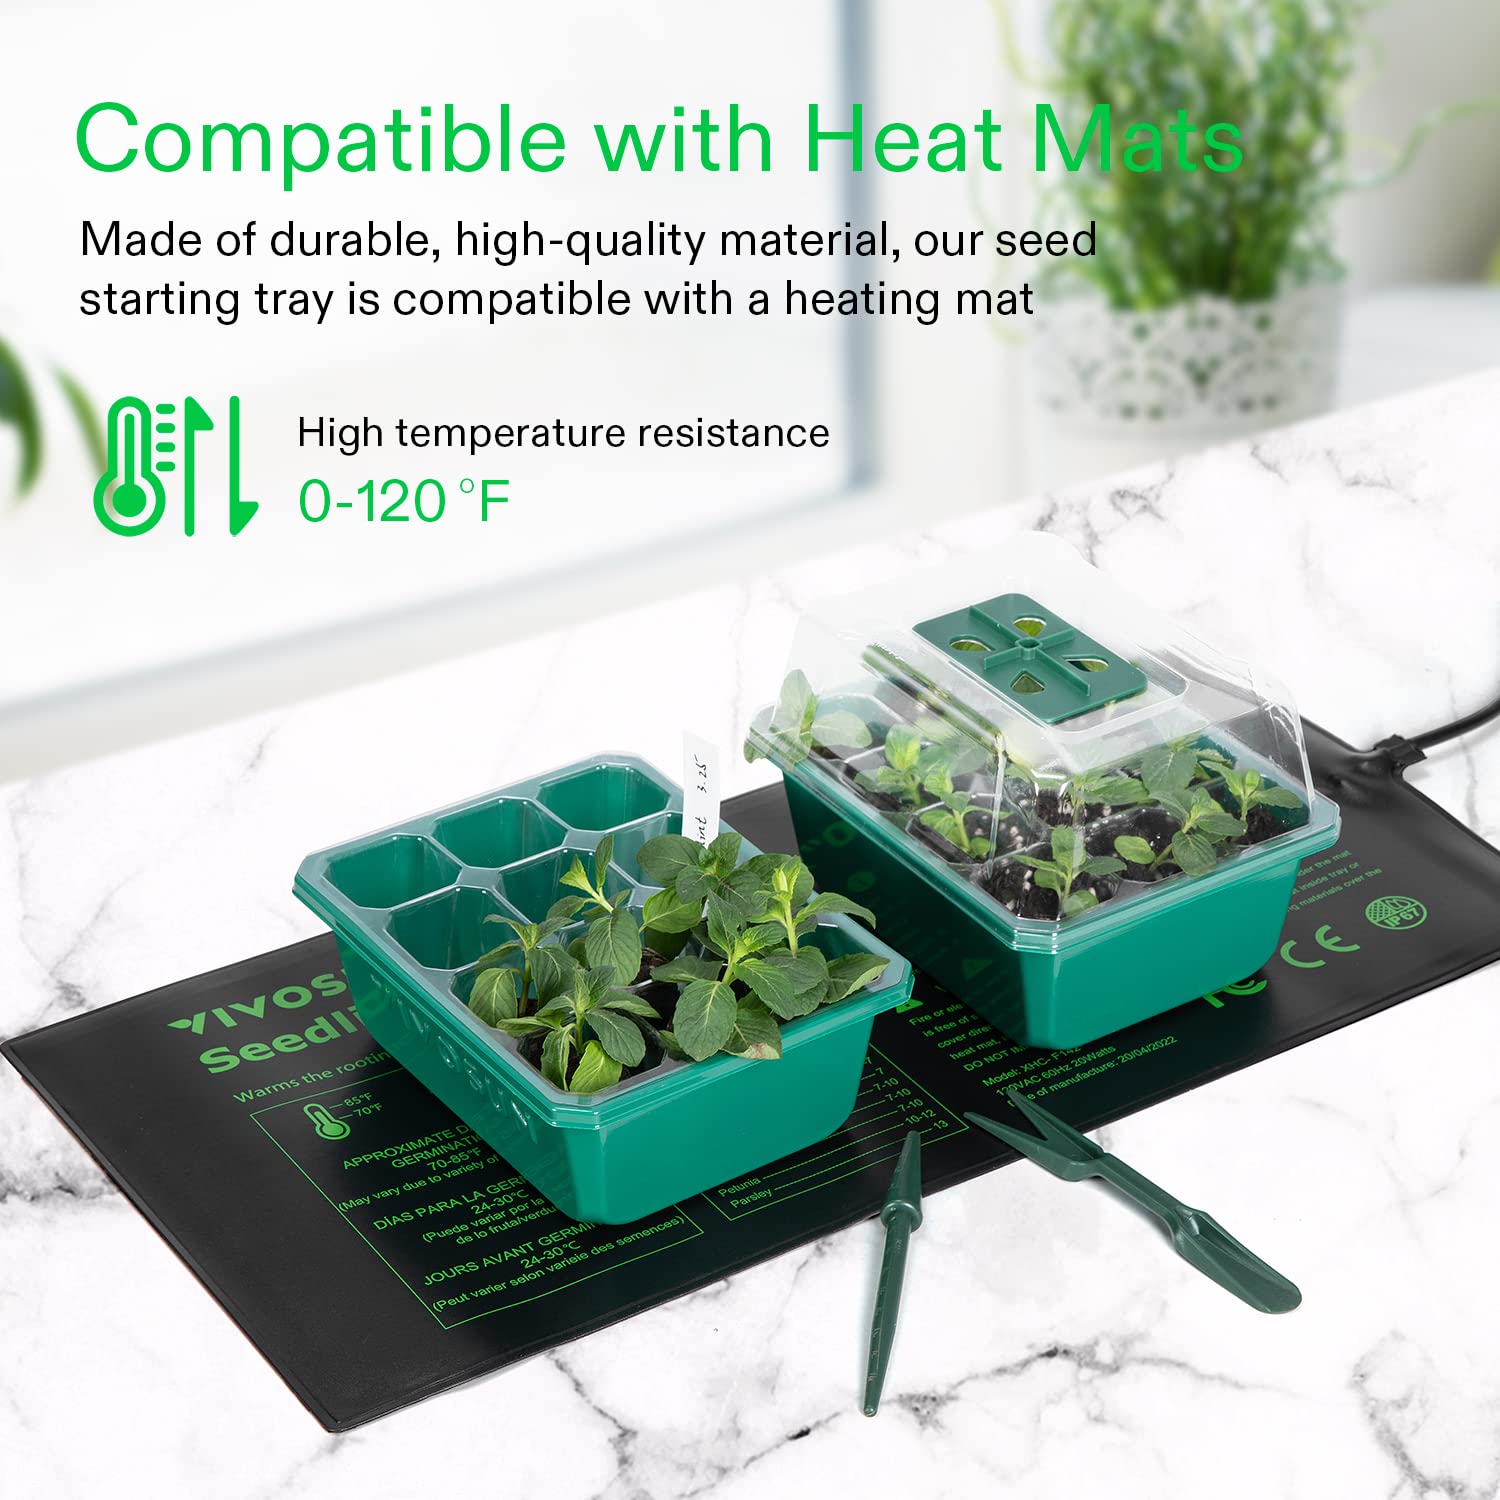 VIVOSUN 6-Pack Seed Starter Trays with 10"x20.75" Seedling Heat Mat, Self-Adjusting Dual Digital Display Temperature Controller, 72-Cell Seed Starter Kit with Humidity Dome, Reusable Propagation Trays